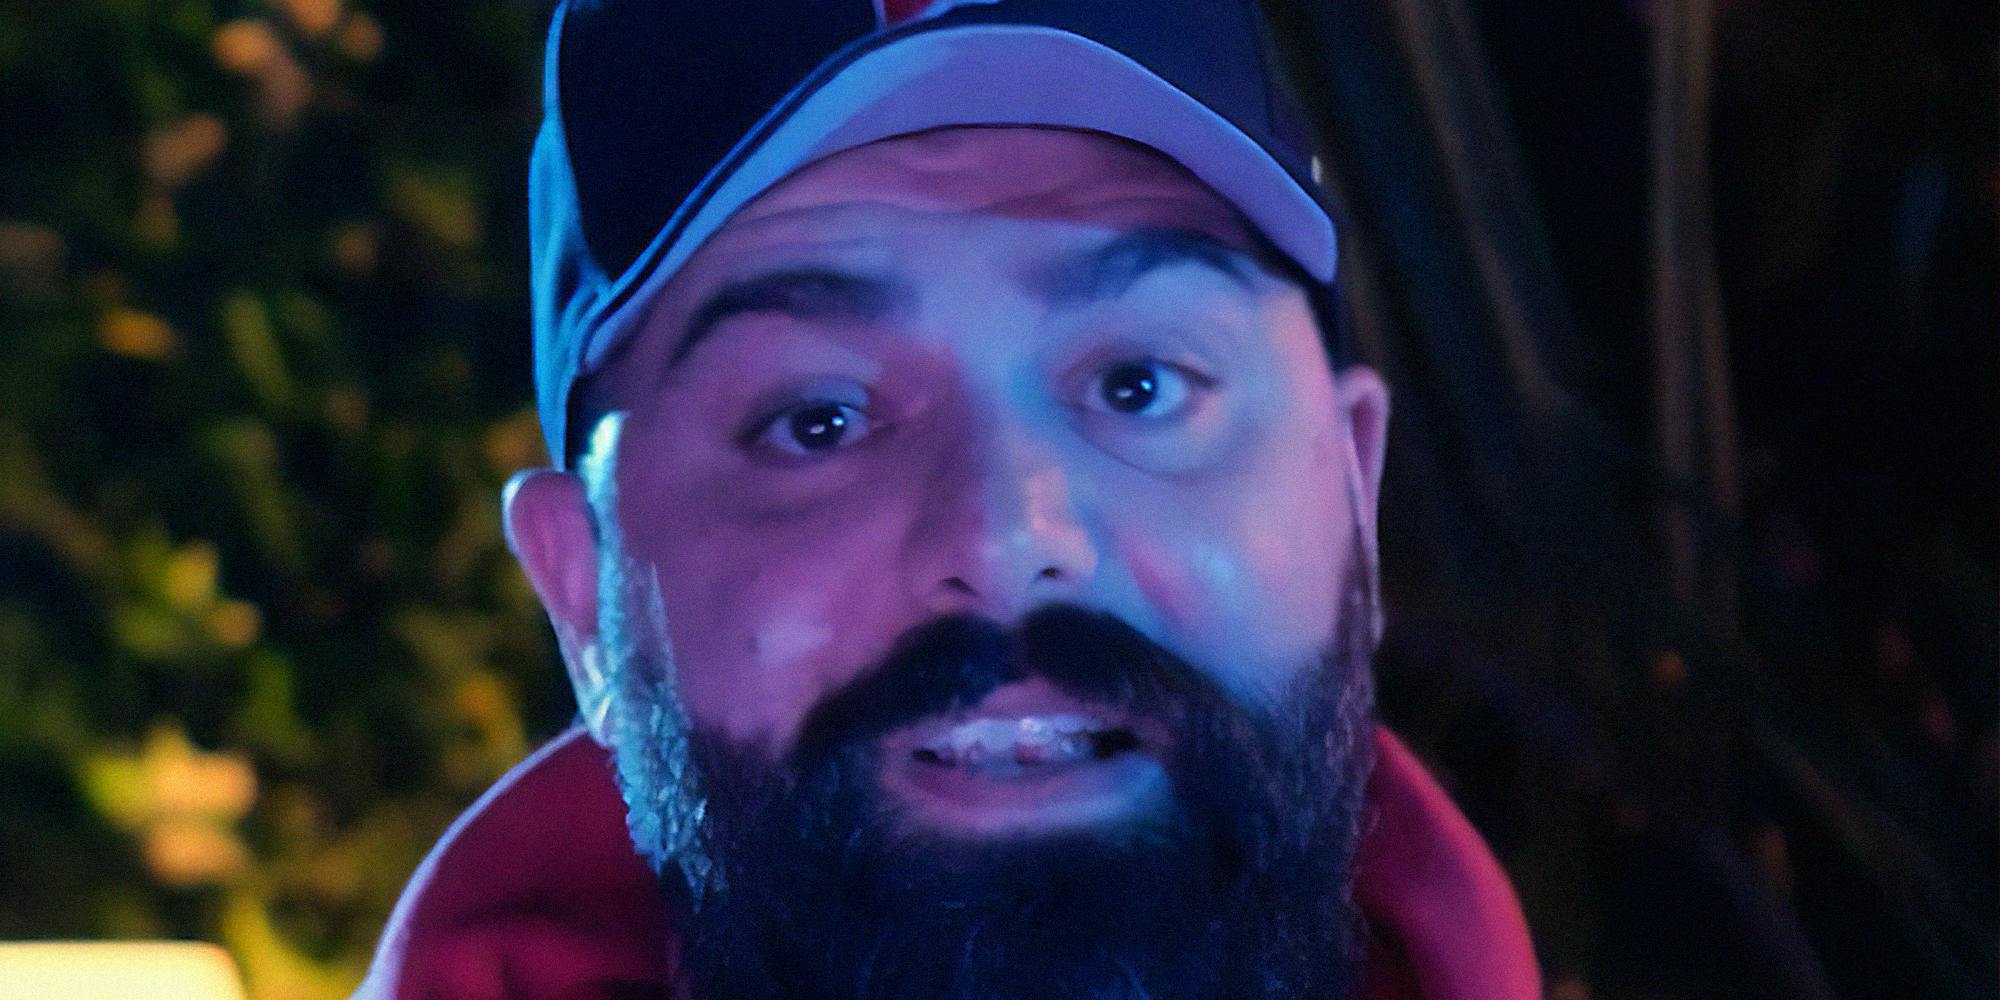 'It’s hateful and racist': Keemstar and Void under fire for mocki...